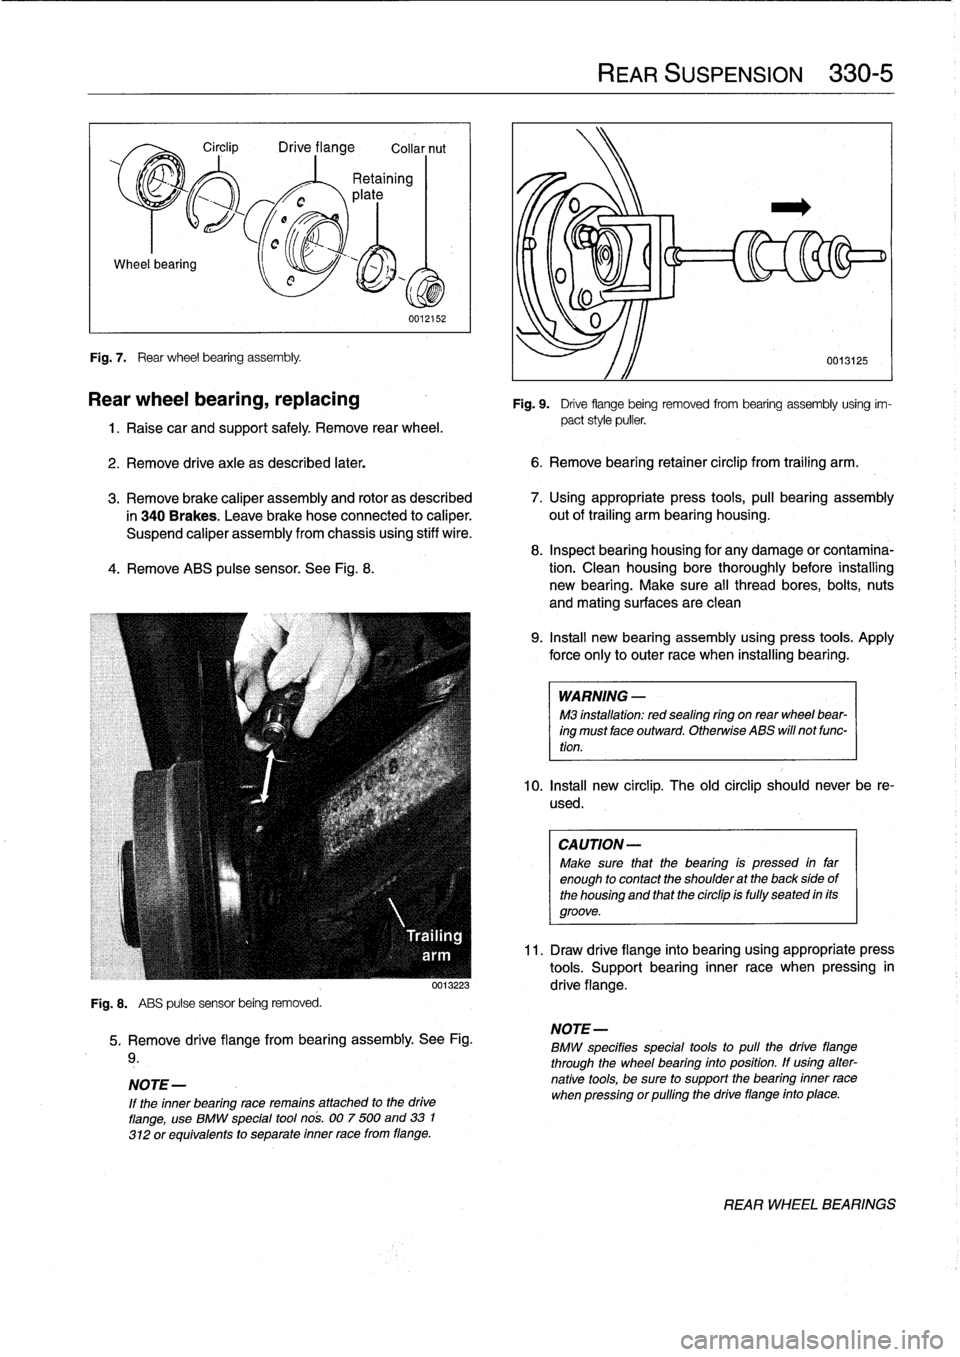 BMW 323i 1998 E36 Owners Guide Wheel
bearing

Fig
.
7
.

	

Rear
wheel
bearing
assembly
.

Circlip

	

Drive
flange

	

Collar
nut

0012152

Rear
wheel
bearing,
replacing

1
.
Raise
car
and
support
safely
.
Remove
rear
wheel
.

2
.